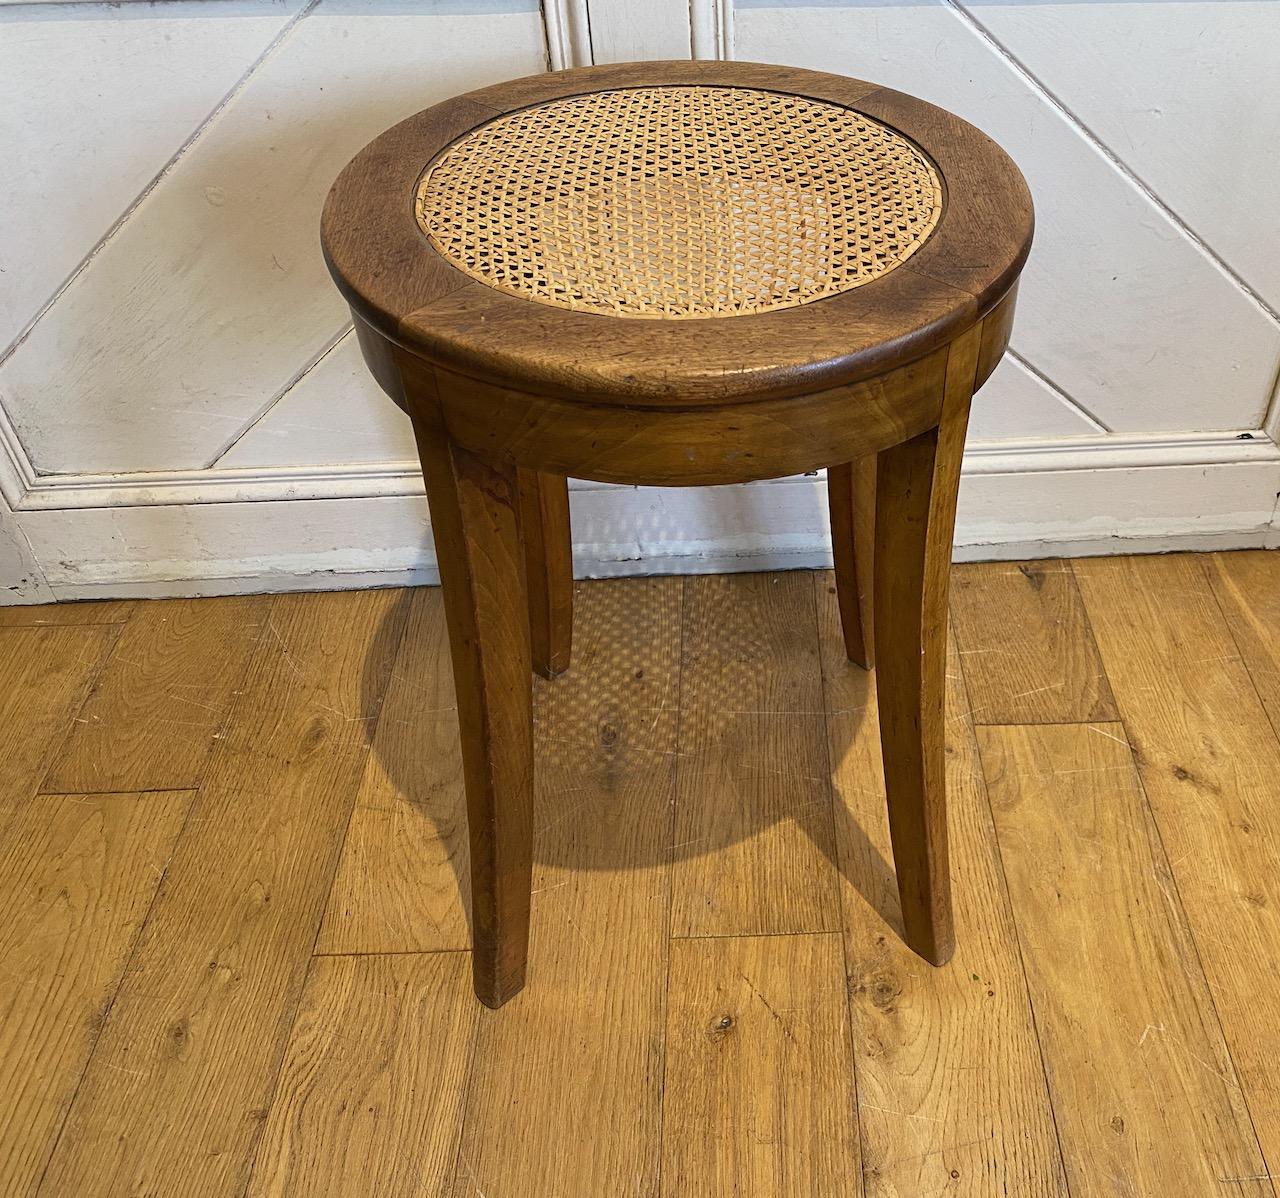 Caned Low Table or Seat